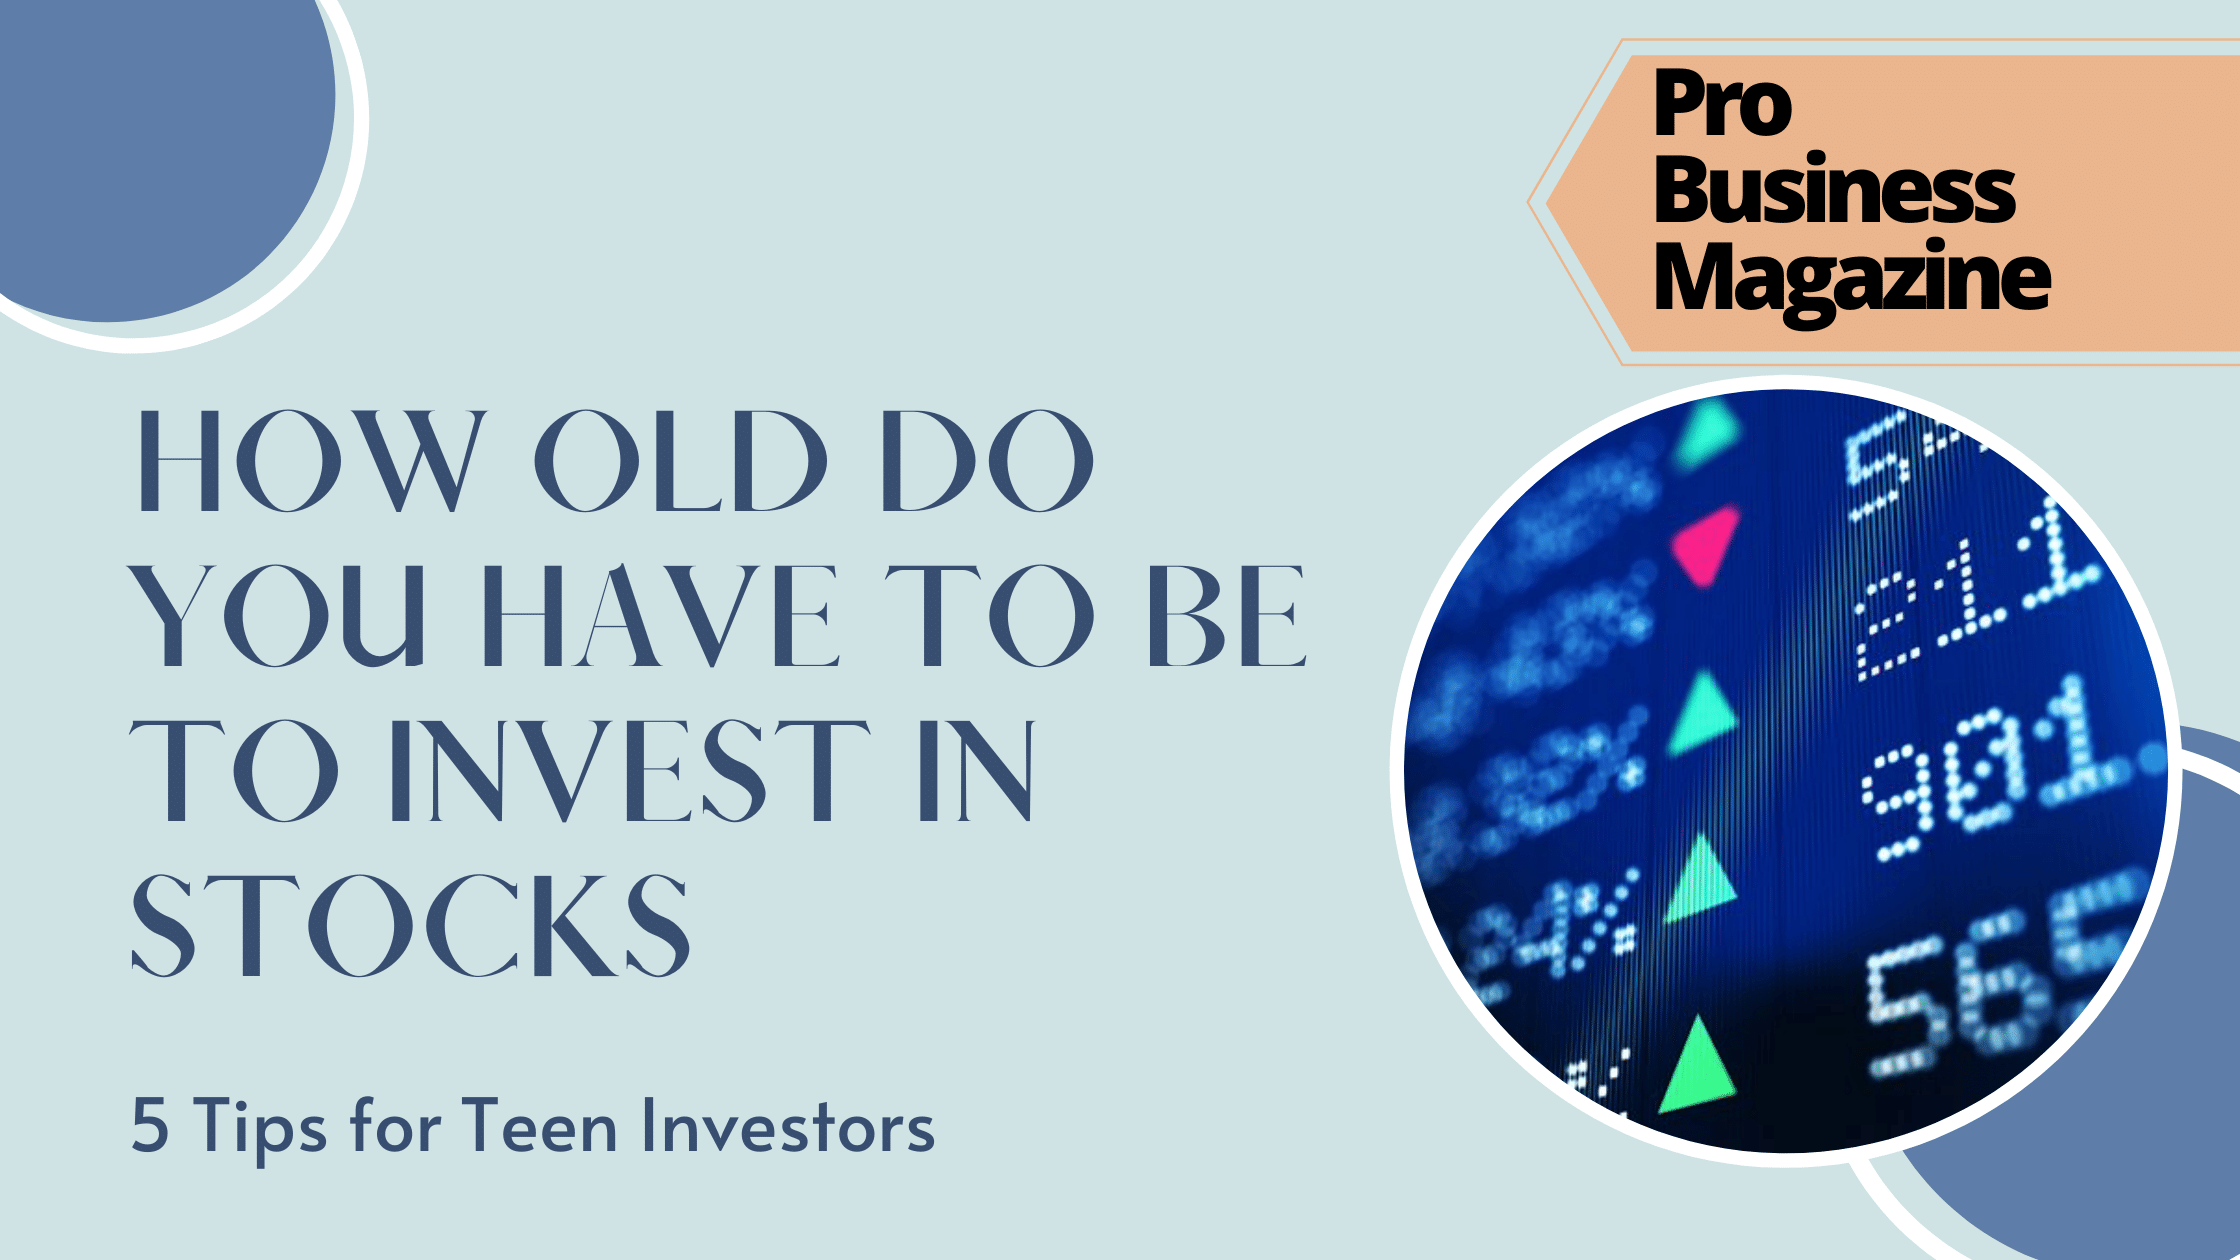 How old do you have to be to invest in Stocks